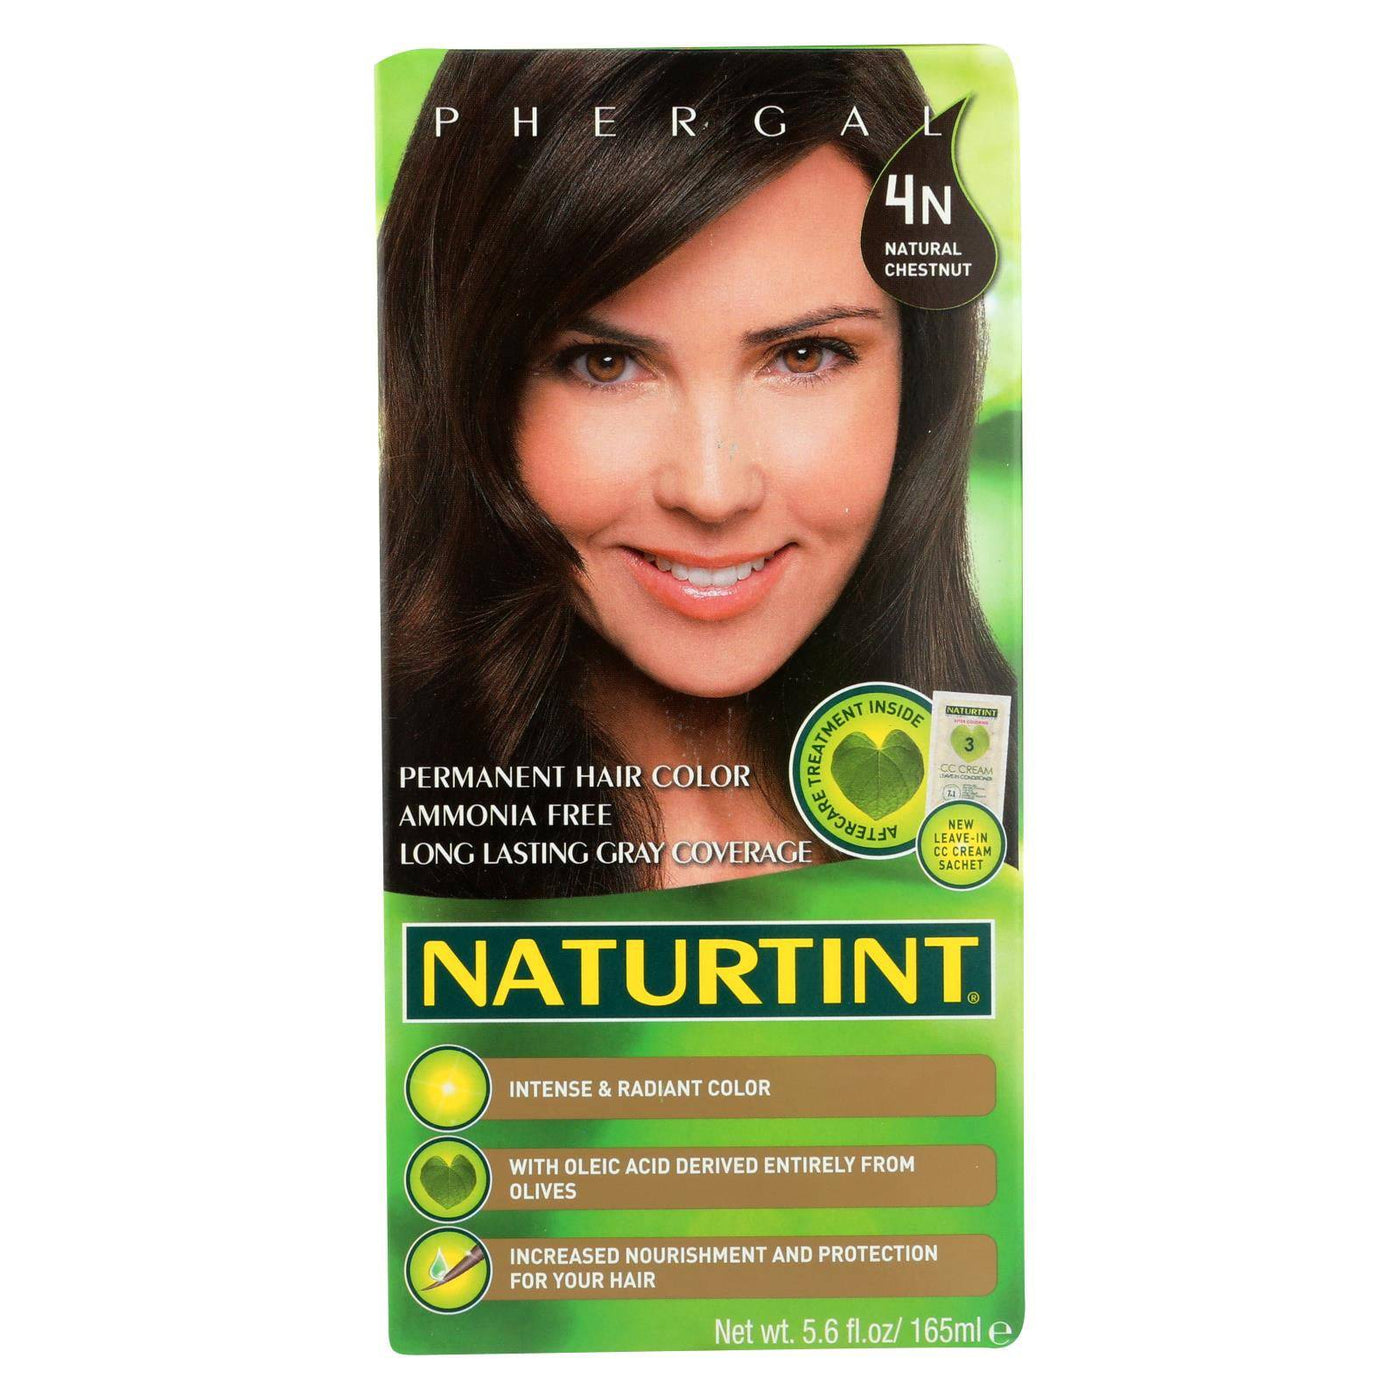 Naturtint Hair Color - Permanent - 4n - Natural Chestnut - 5.28 Oz | OnlyNaturals.us